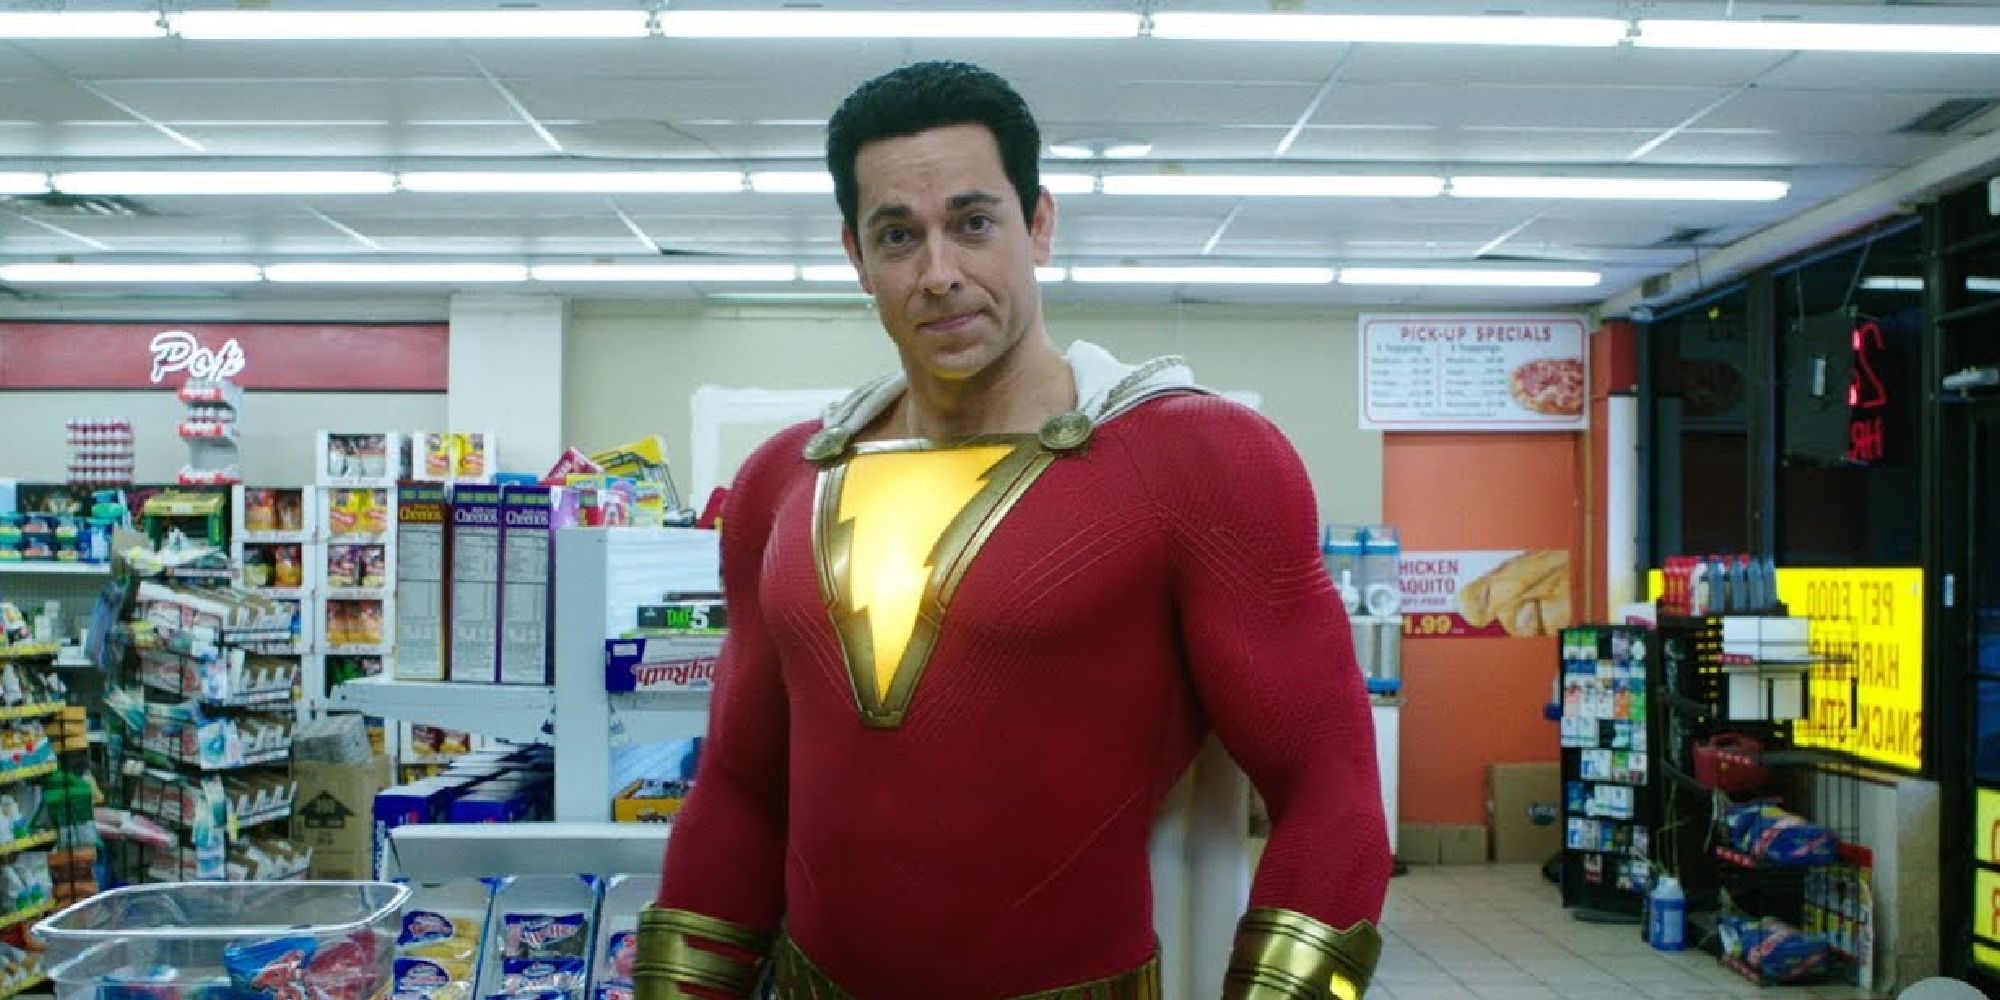 Billy in his Shazam form at a grocery store